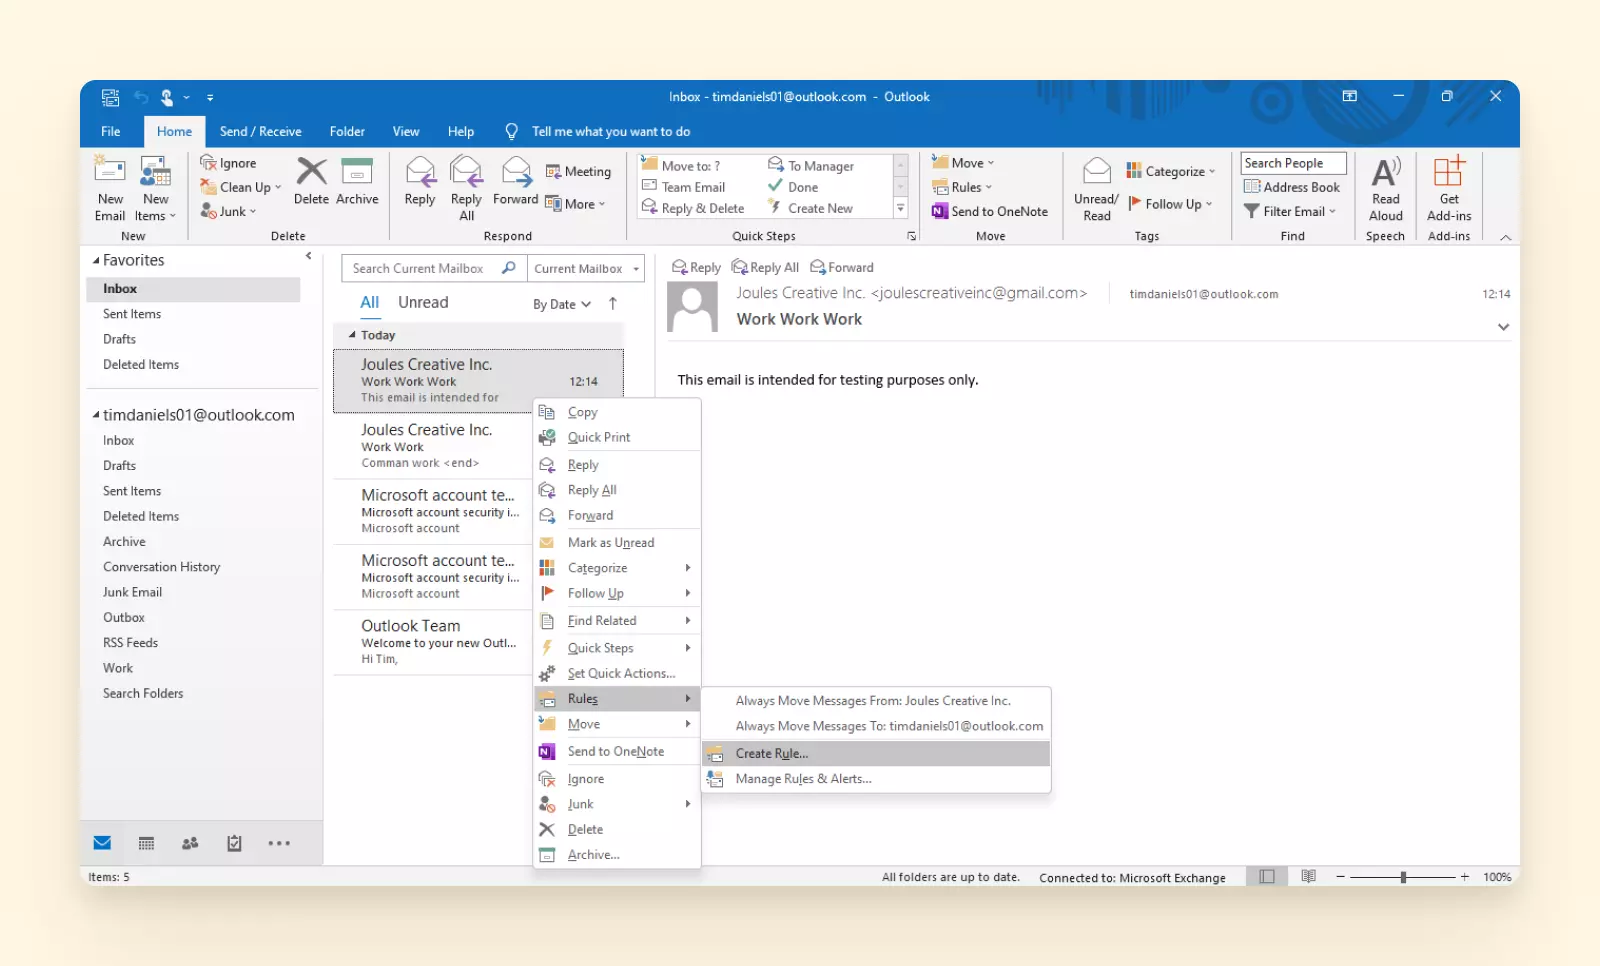 Creating a rule in Outlook 2007